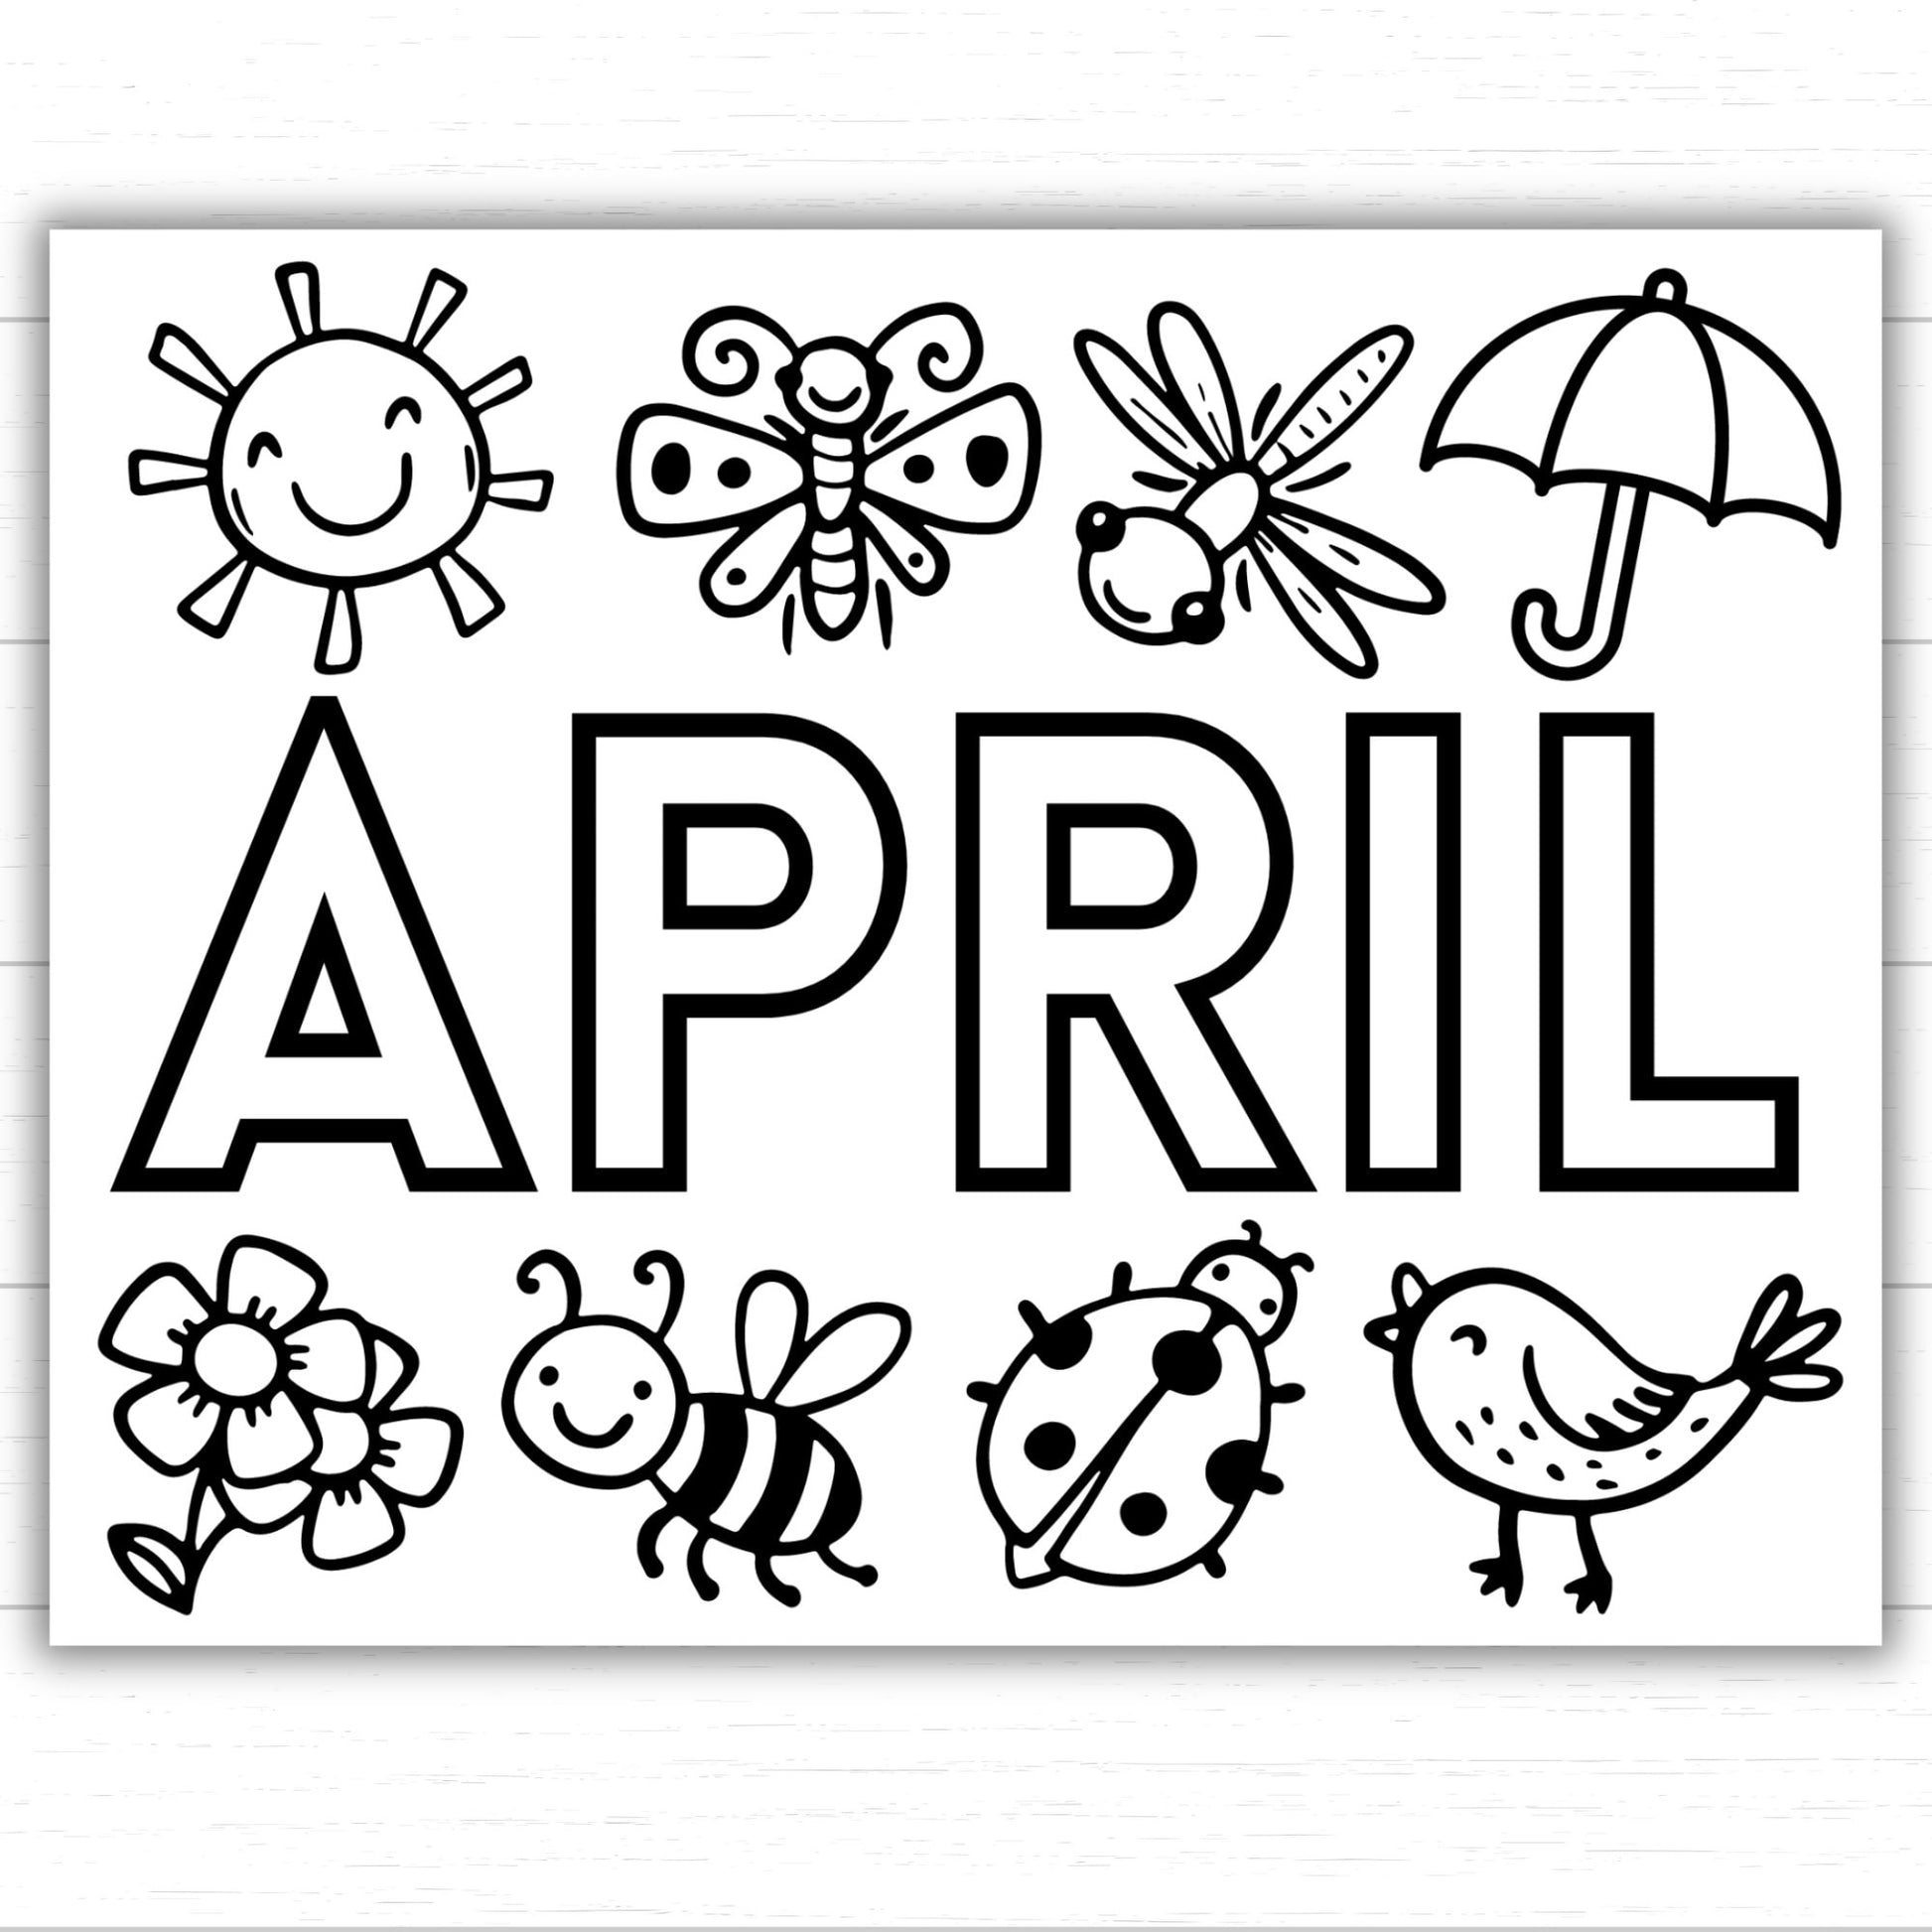 April Coloring Page, Spring Coloring Page, Month of April Activity, Coloring Activity, Printable Coloring Pages for Kids, Springtime Fun